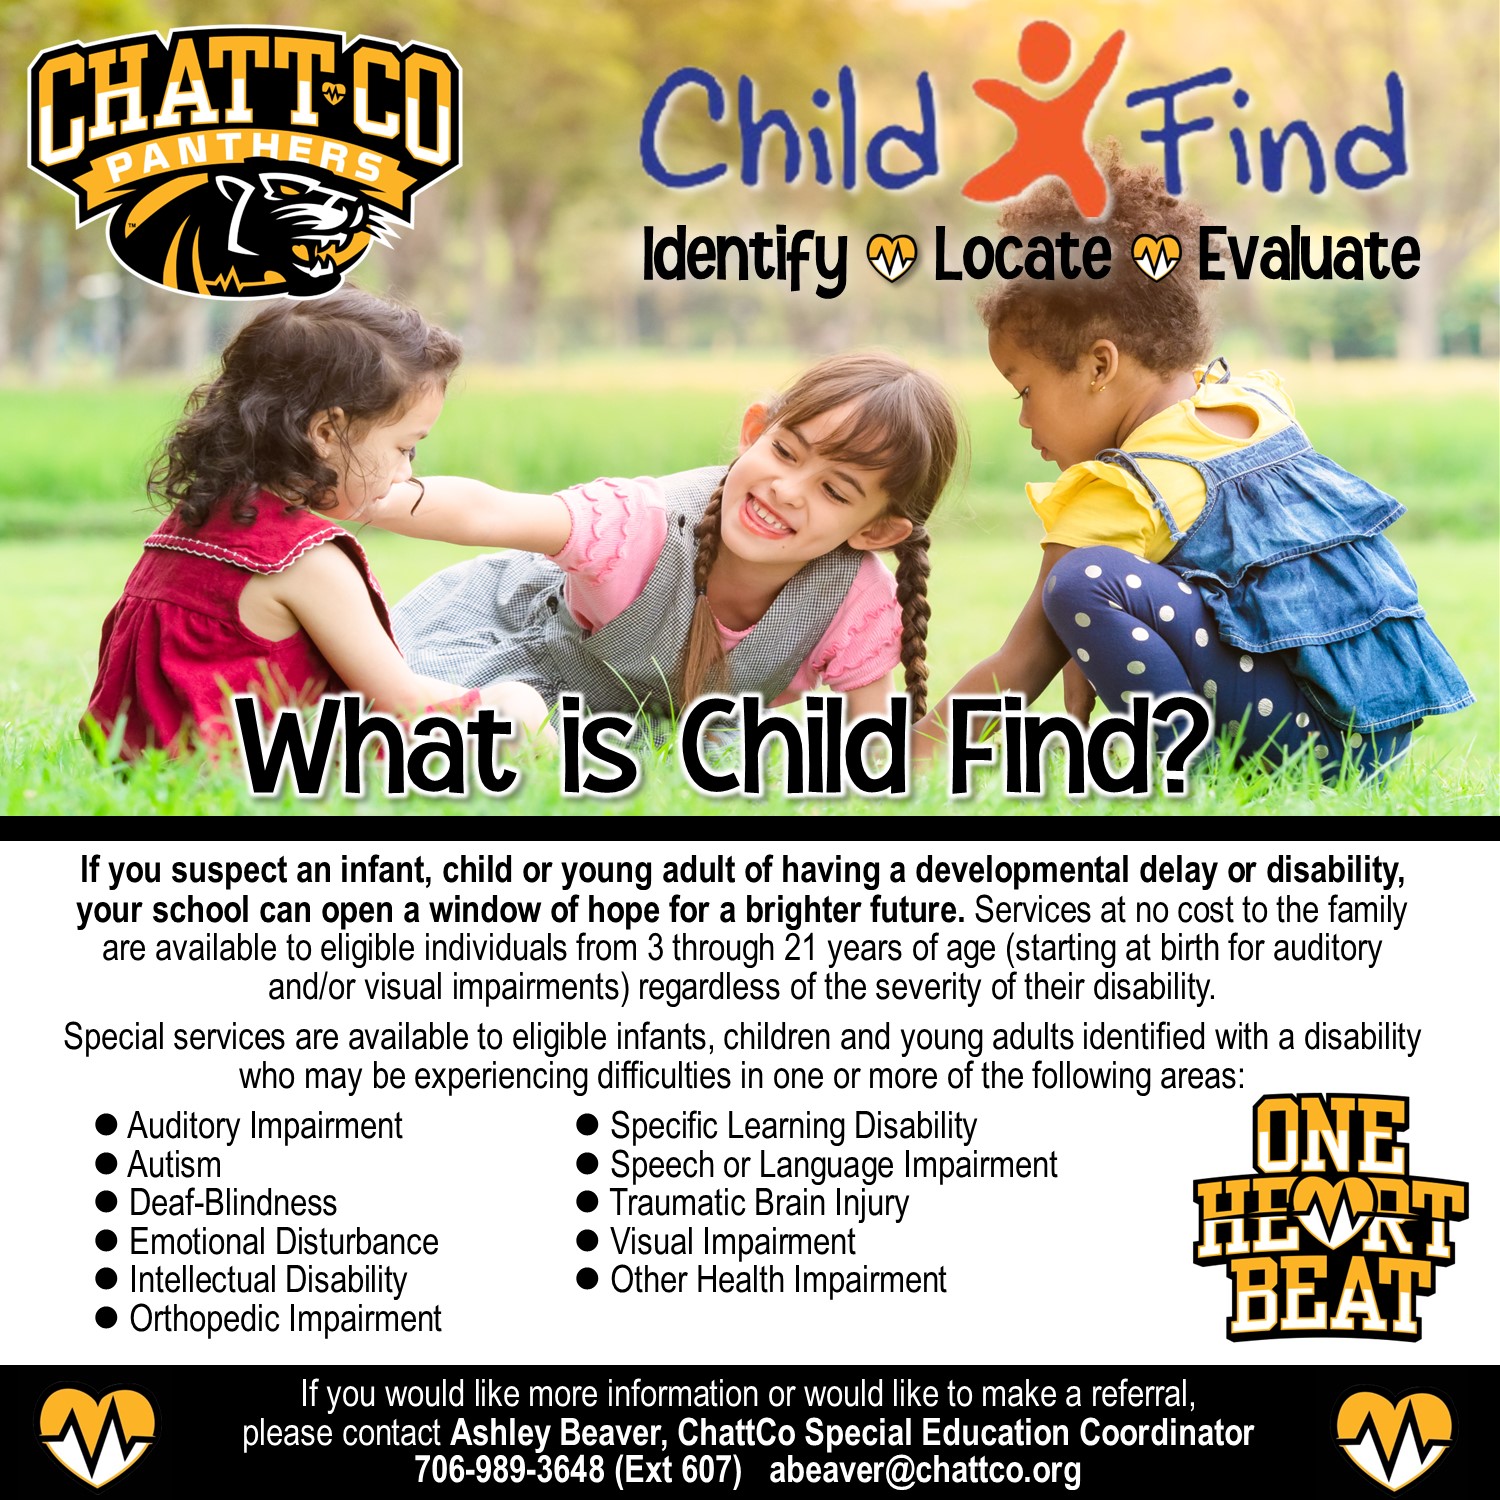 What is Child Find? If you suspect an infant, child or young adult of having a developmental delay or disability,  your school can open a window of hope for a brighter future. Services at no cost to the family  are available to eligible individuals from 3 through 21 years of age (starting at birth for auditory  and/or visual impairments) regardless of the severity of their disability.  Special services are available to eligible infants, children and young adults identified with a disability  who may be experiencing difficulties in one or more of the following areas: l Auditory Impairment l Autism l Deaf-Blindness l Emotional Disturbance l Intellectual Disability l Orthopedic Impairment  l Specific Learning Disability l Speech or Language Impairment l Traumatic Brain Injury l Visual Impairment l Other Health Impairment If you would like more information or would like to make a referral, please contact Ashley Beaver, ChattCo Special Education Coordinator 706-989-3648 (Ext 607)   abeaver@chattco.org